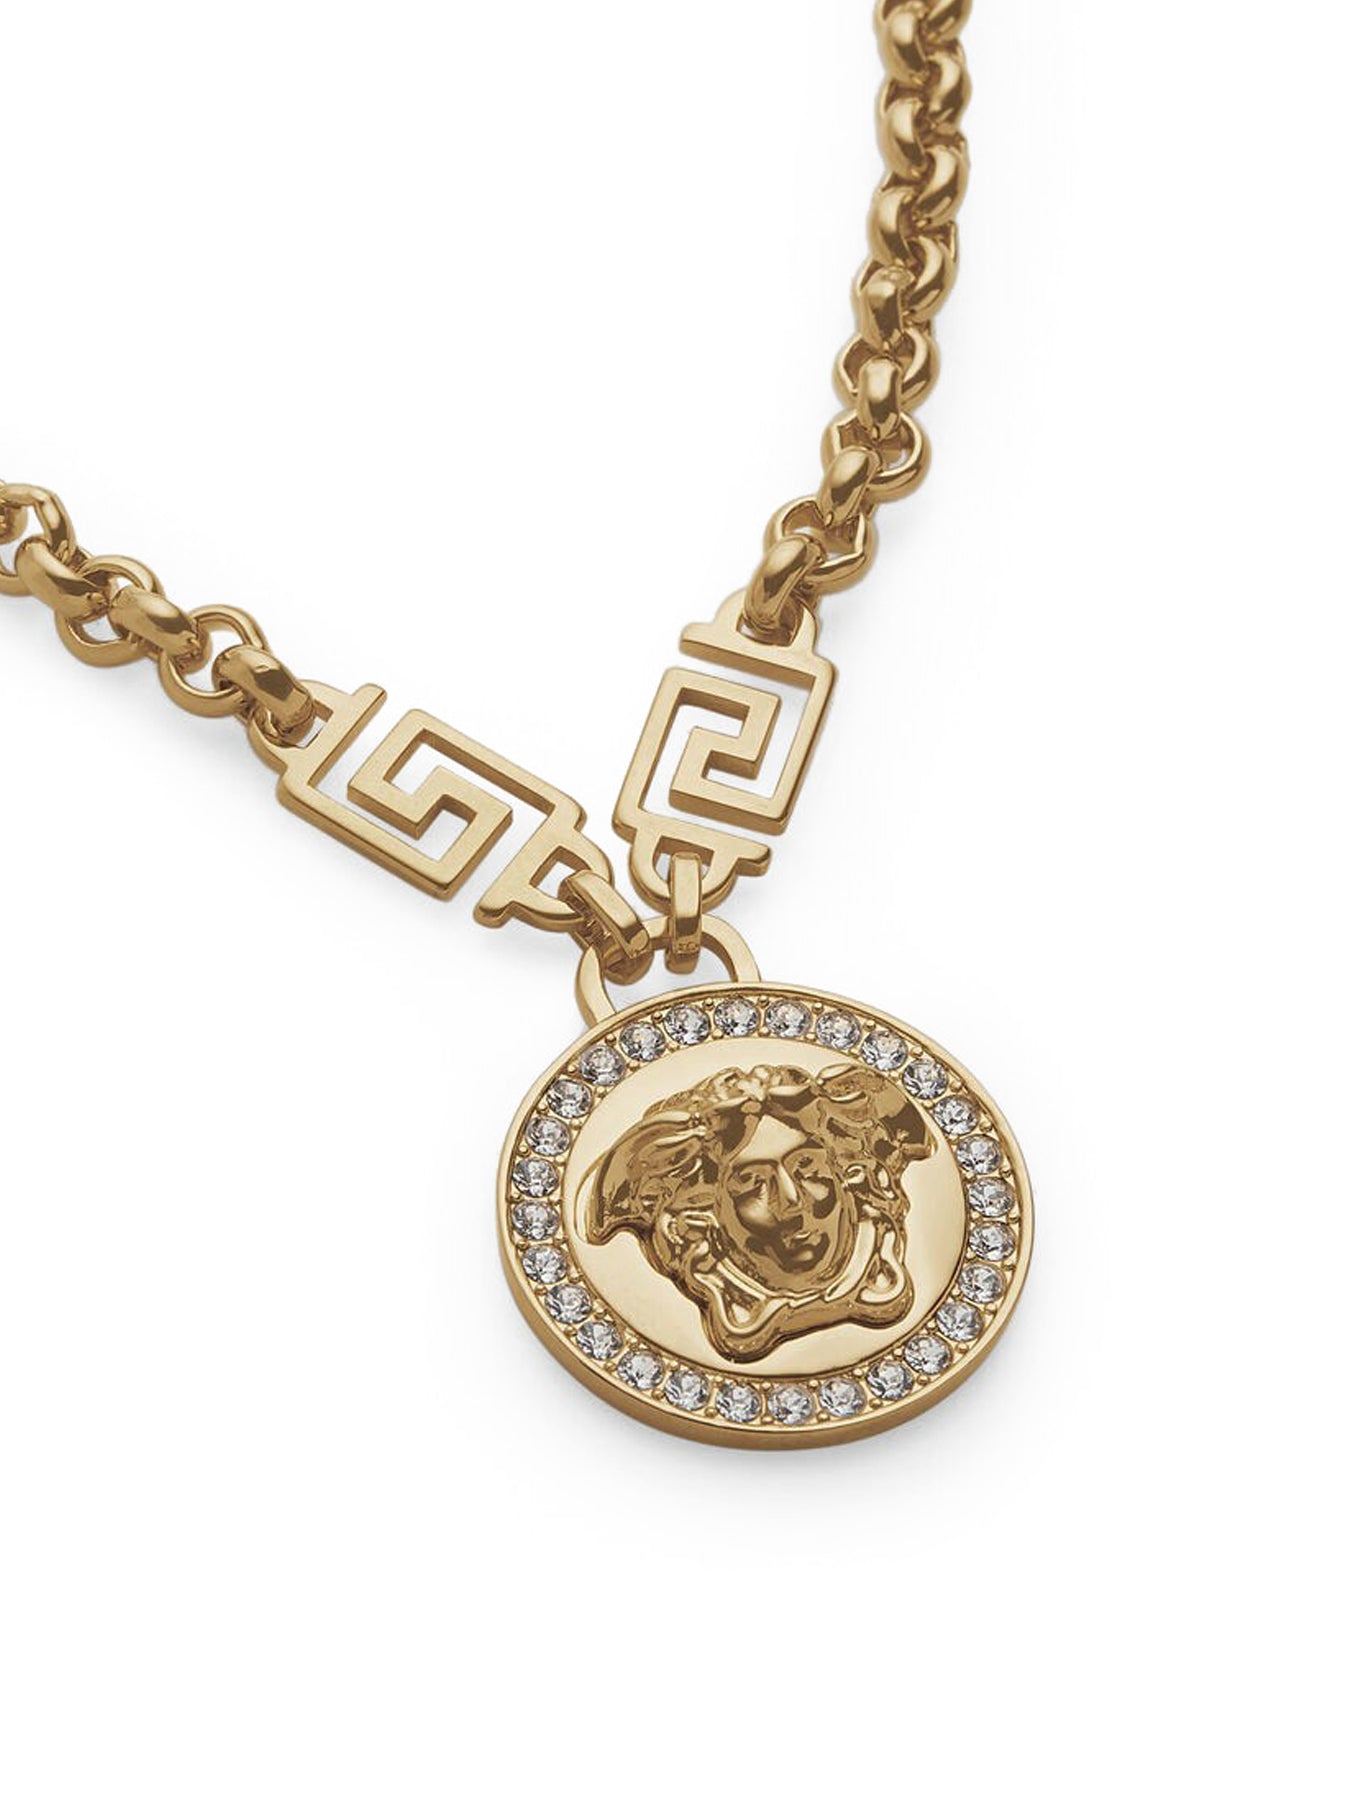 THE GREEK MEDUSA NECKLACE WITH CRYSTALS